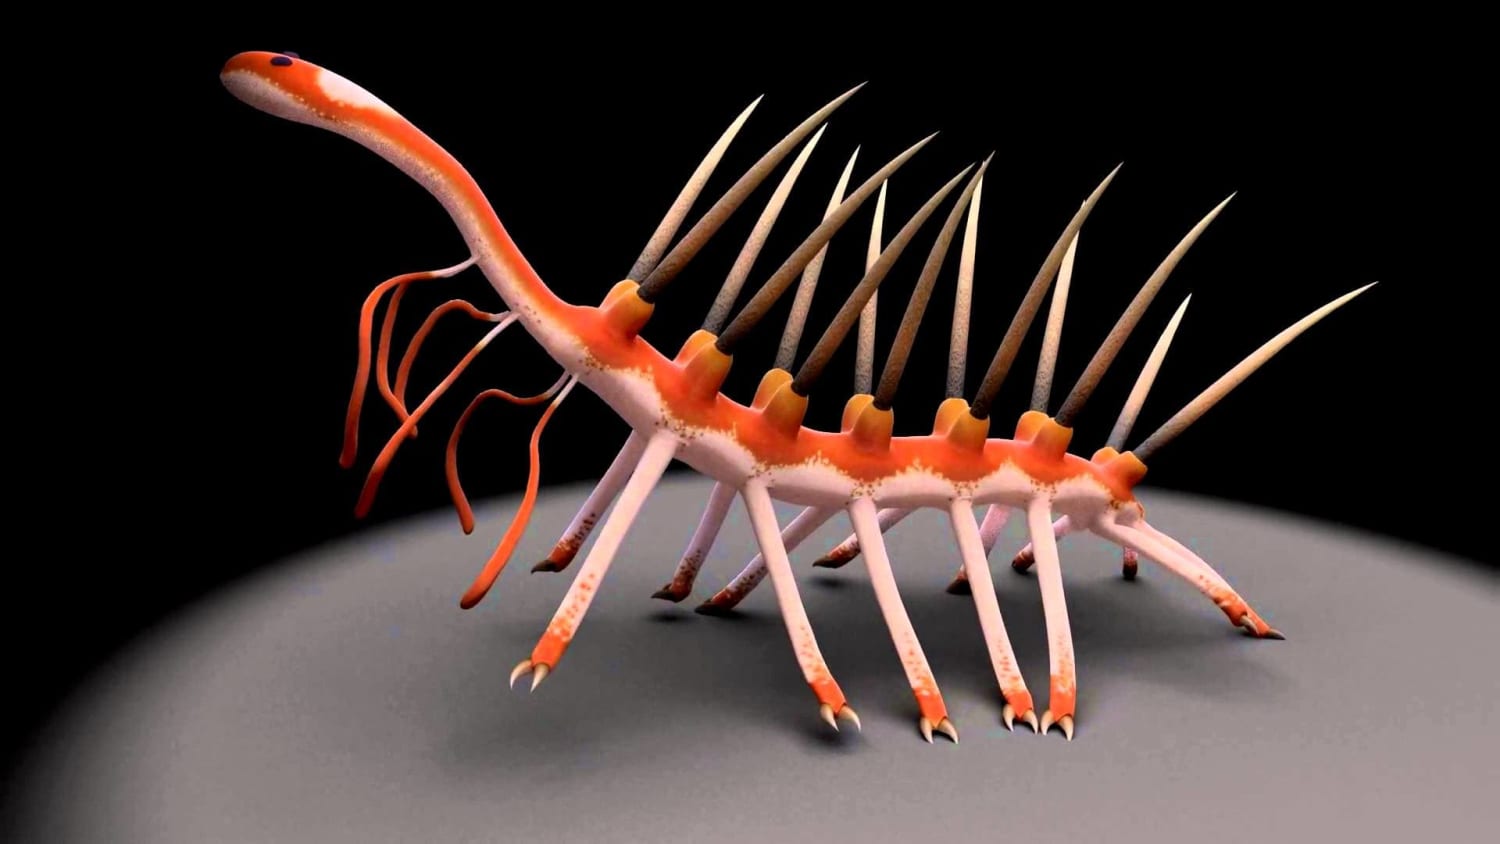 Hallucigenia is aptly named: With long spines down its back, seven pairs of clawed legs, and six tentacles gracing its neck, the 500 million year old ocean-floor denizen was an ancient relative of the velvet worm. Hallucigenia is a very early member of Ecdysozoa whose members all shed their cuticle.